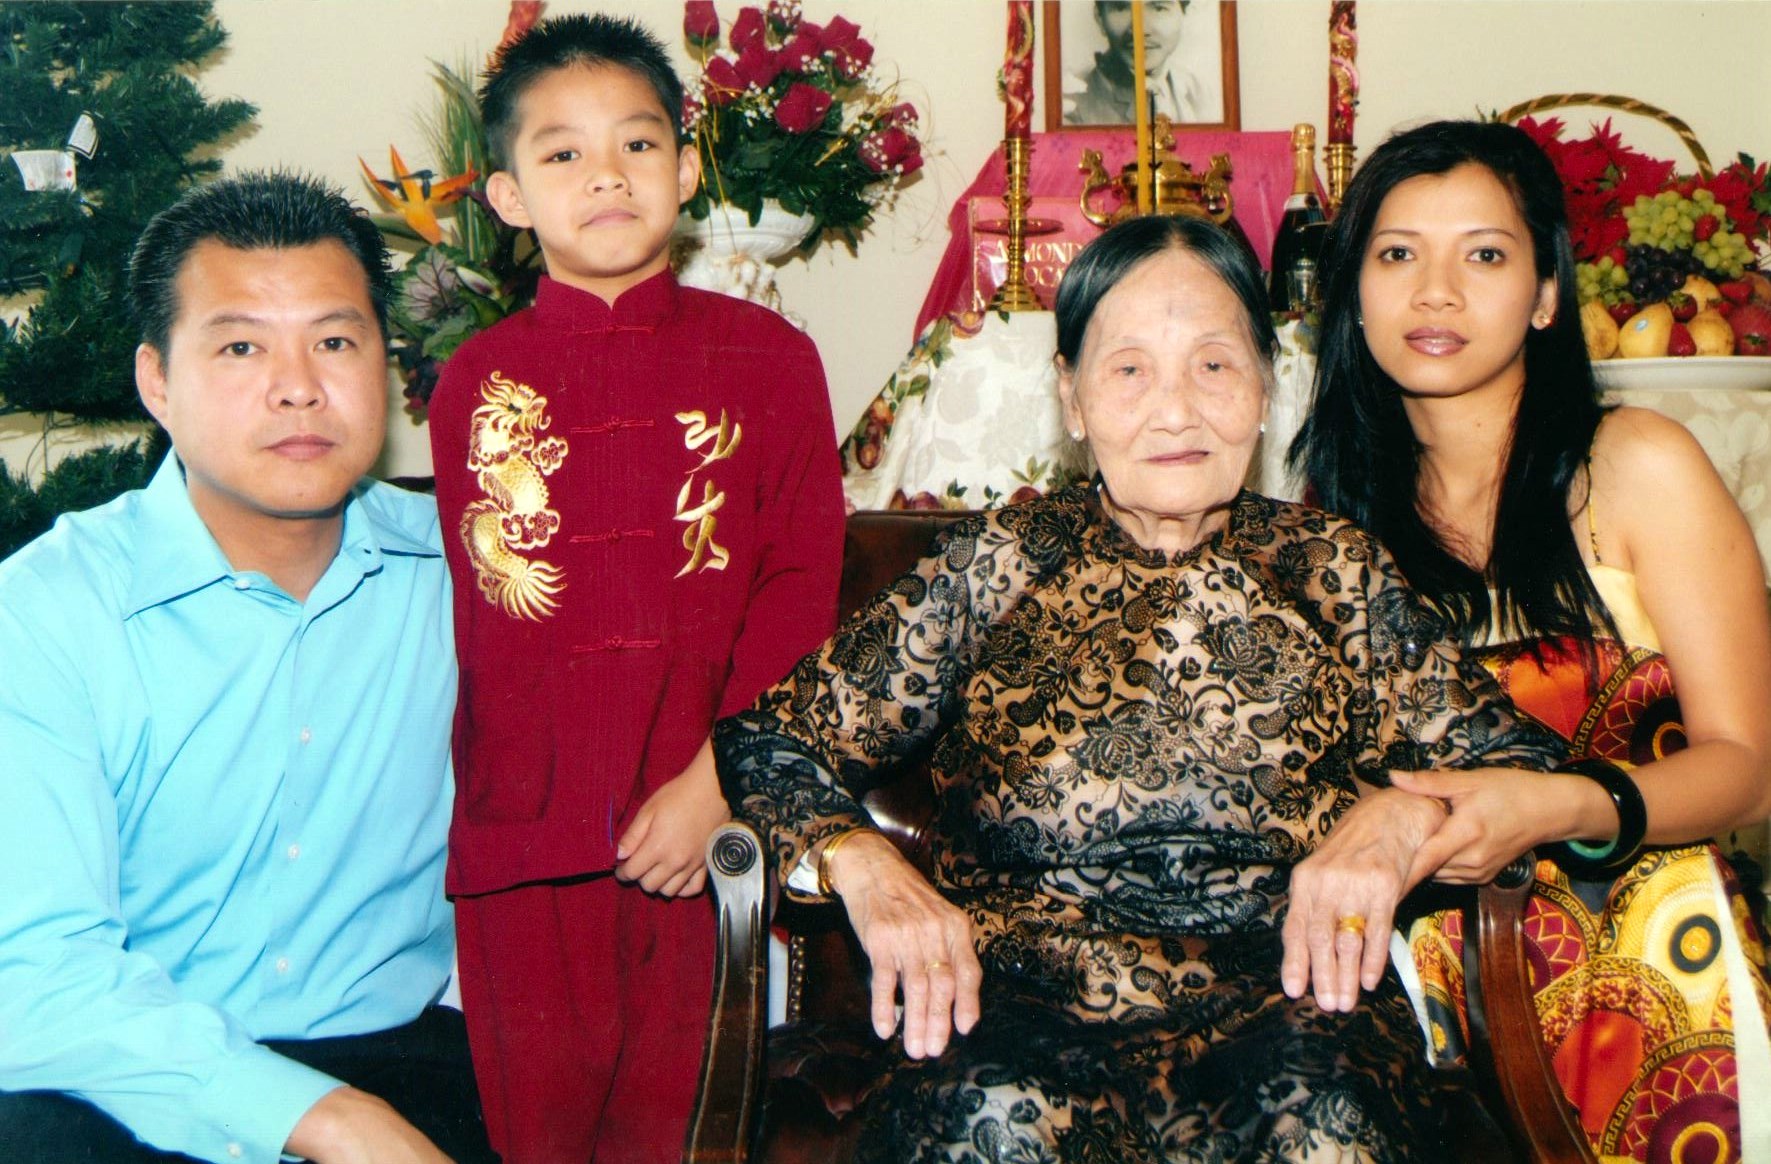 Obituary of Trần Thị AN - 06/18/2018 - From the Family